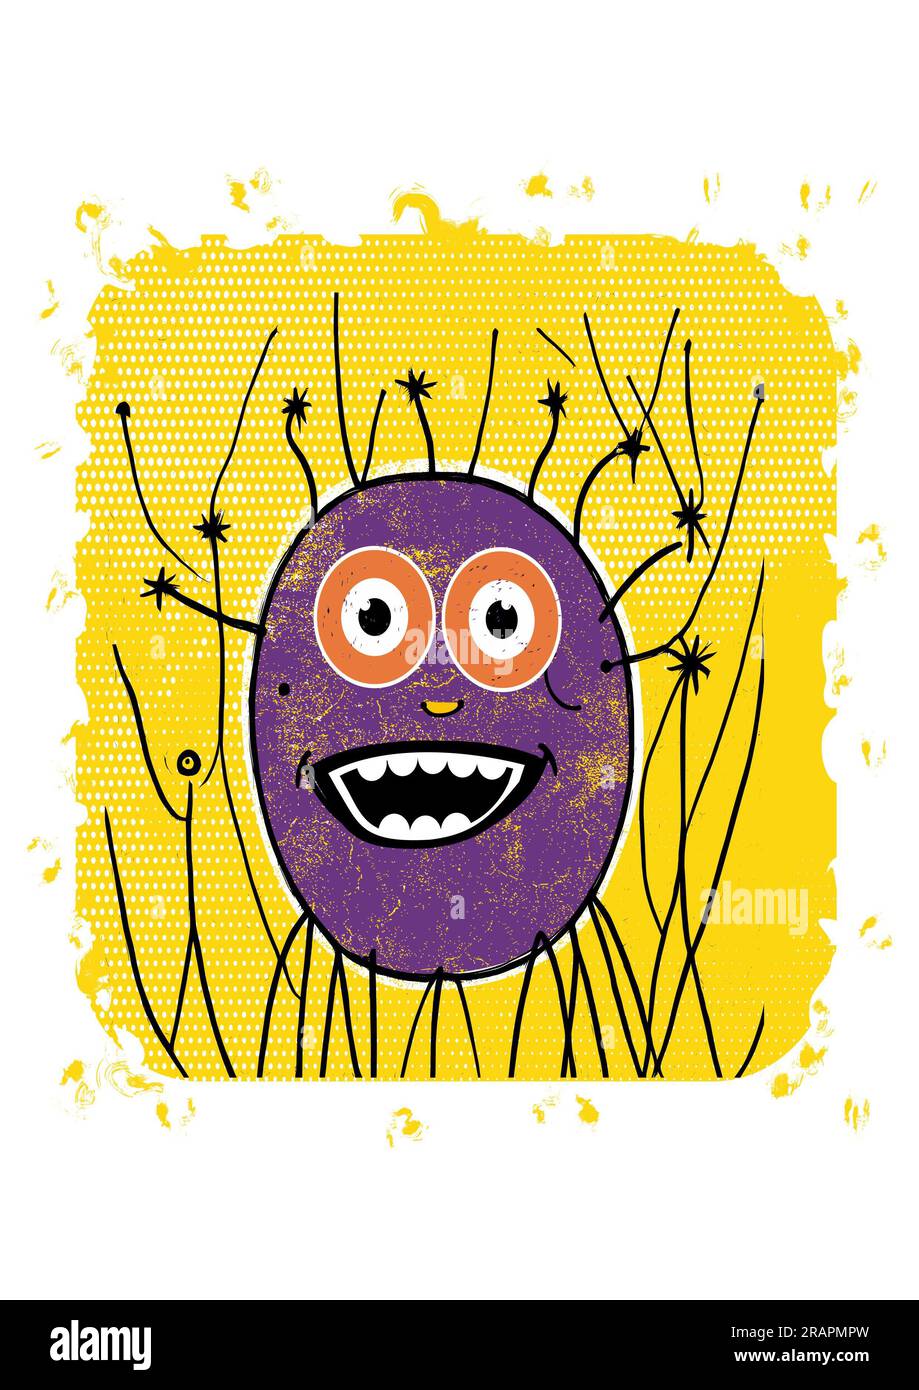 Funny  round friendly monster , creature smiling happily on a bright yellow background Stock Photo